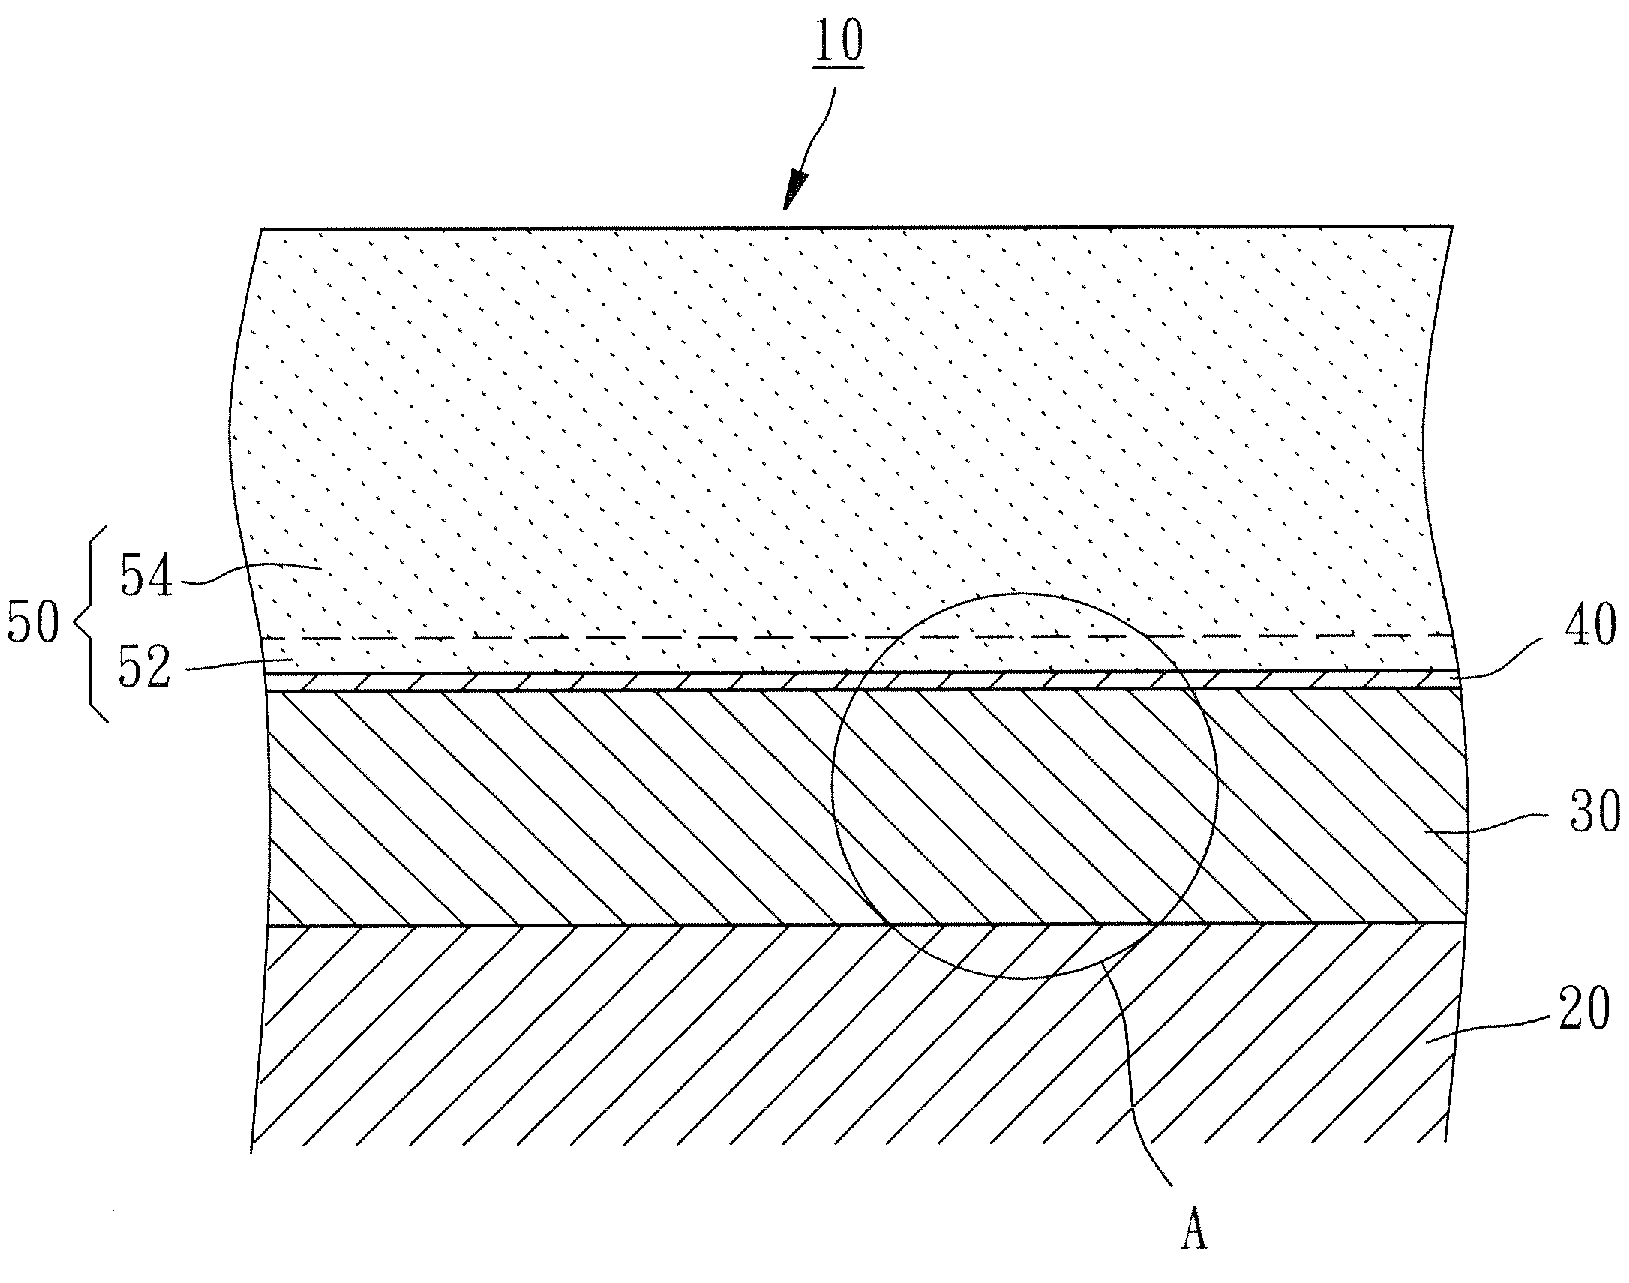 Highly thermally conductive circuit substrate